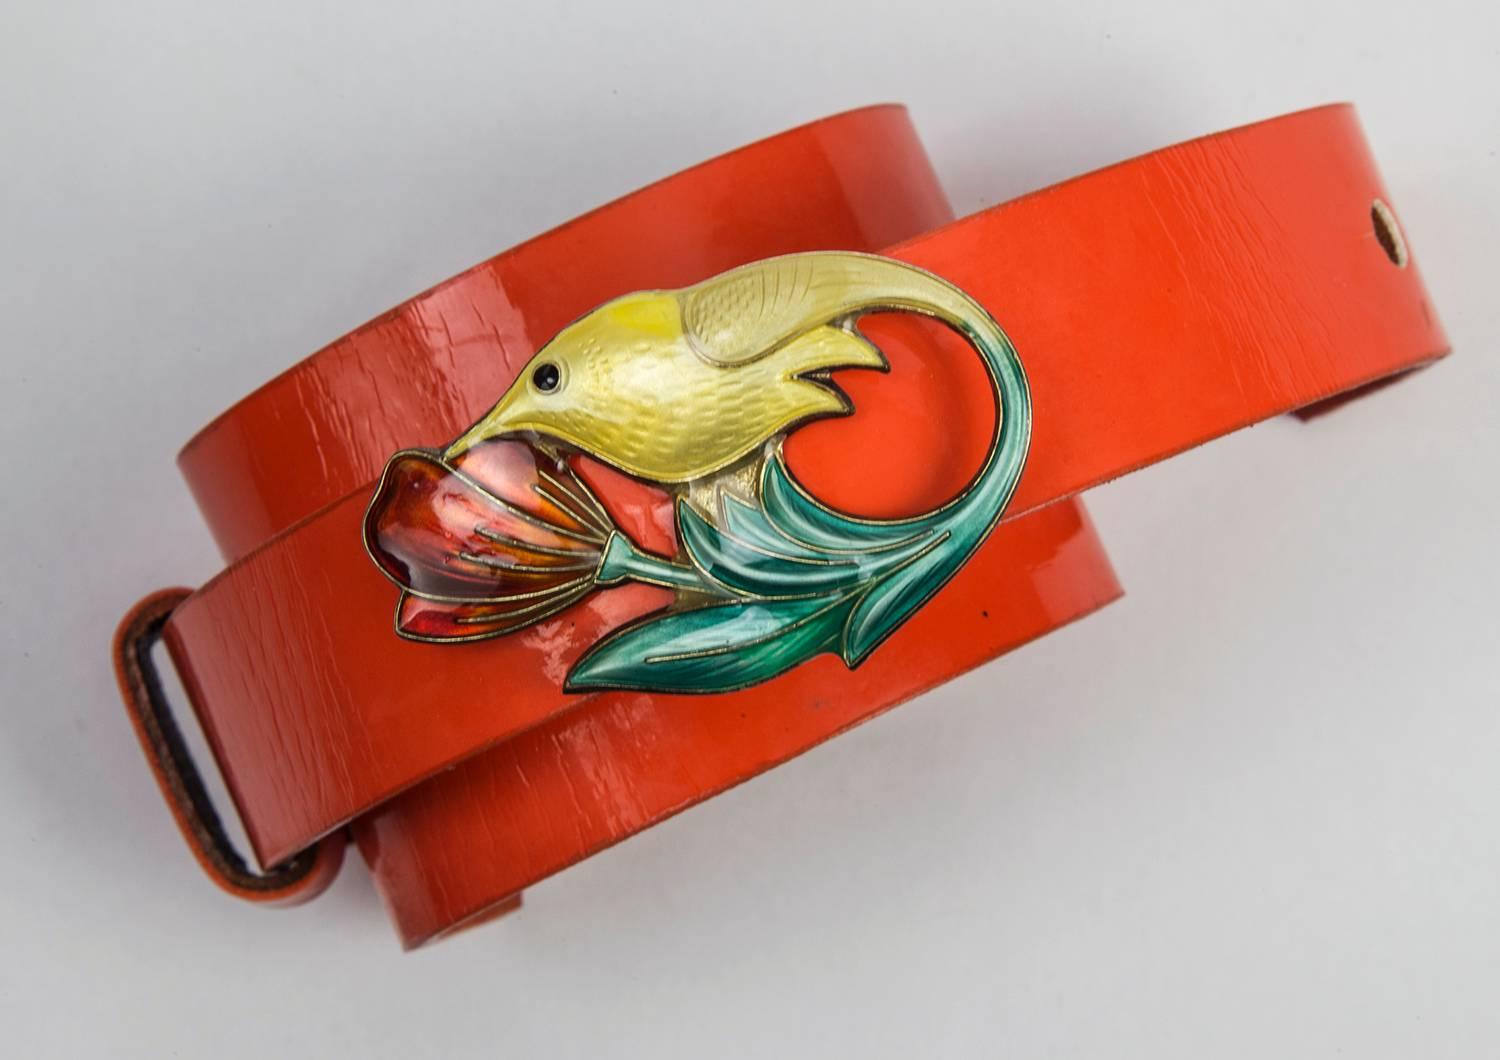 Featuring a David Andersen Enamel Sterling Silver Humming Bird feeding from the blossom of a flower, on an orange Leather Cuff Bracelet; adjustable, fits small to medium/large wrist comfortably. Bird Marked: DA NORWAY STERLING 925S; Circa 1950s.